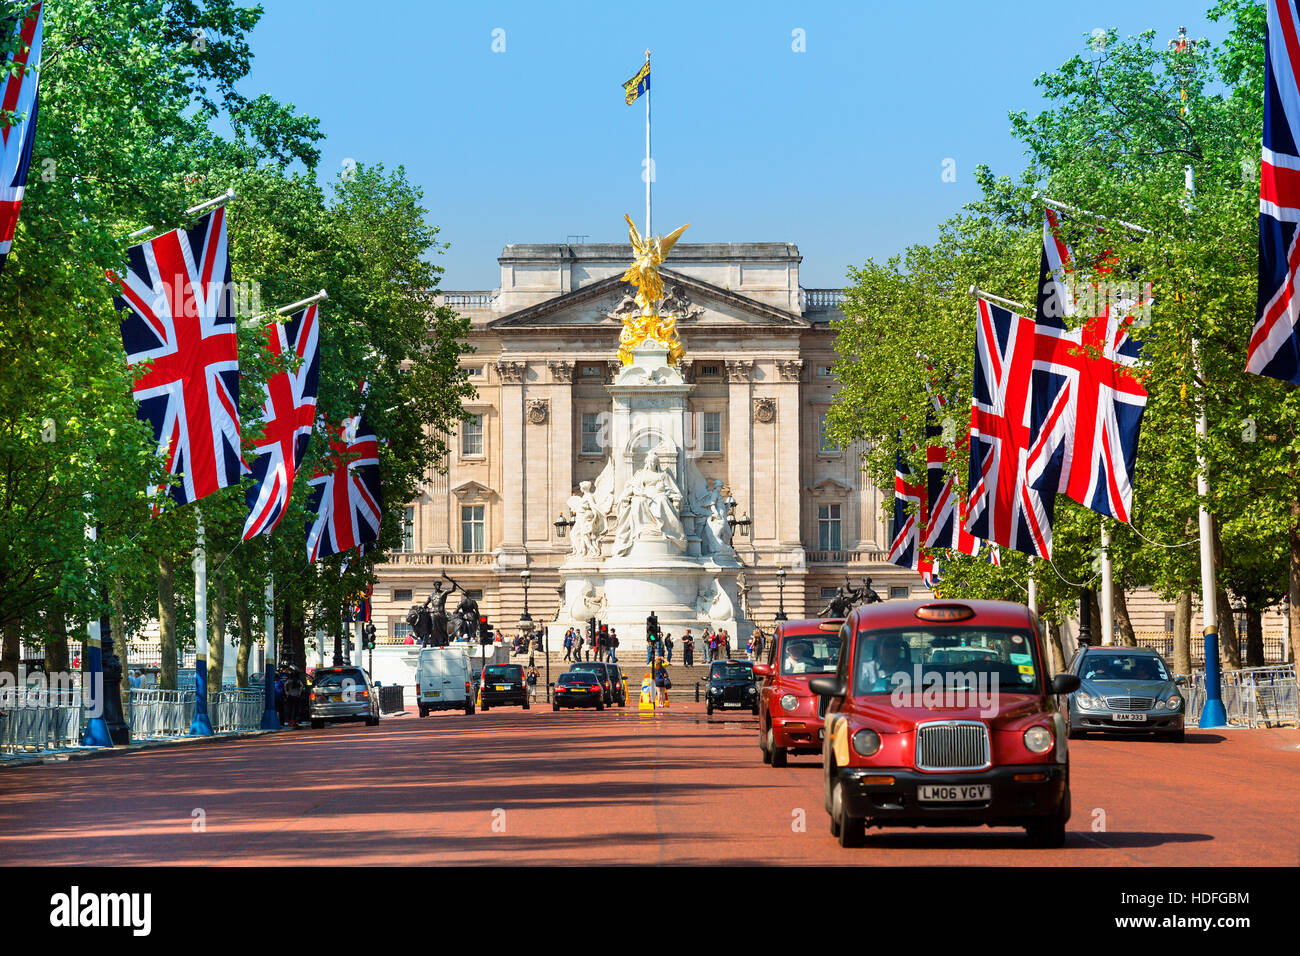 LONDON, ENGLAND - Traffic in London with Buckingham Palace in background Stock Photo